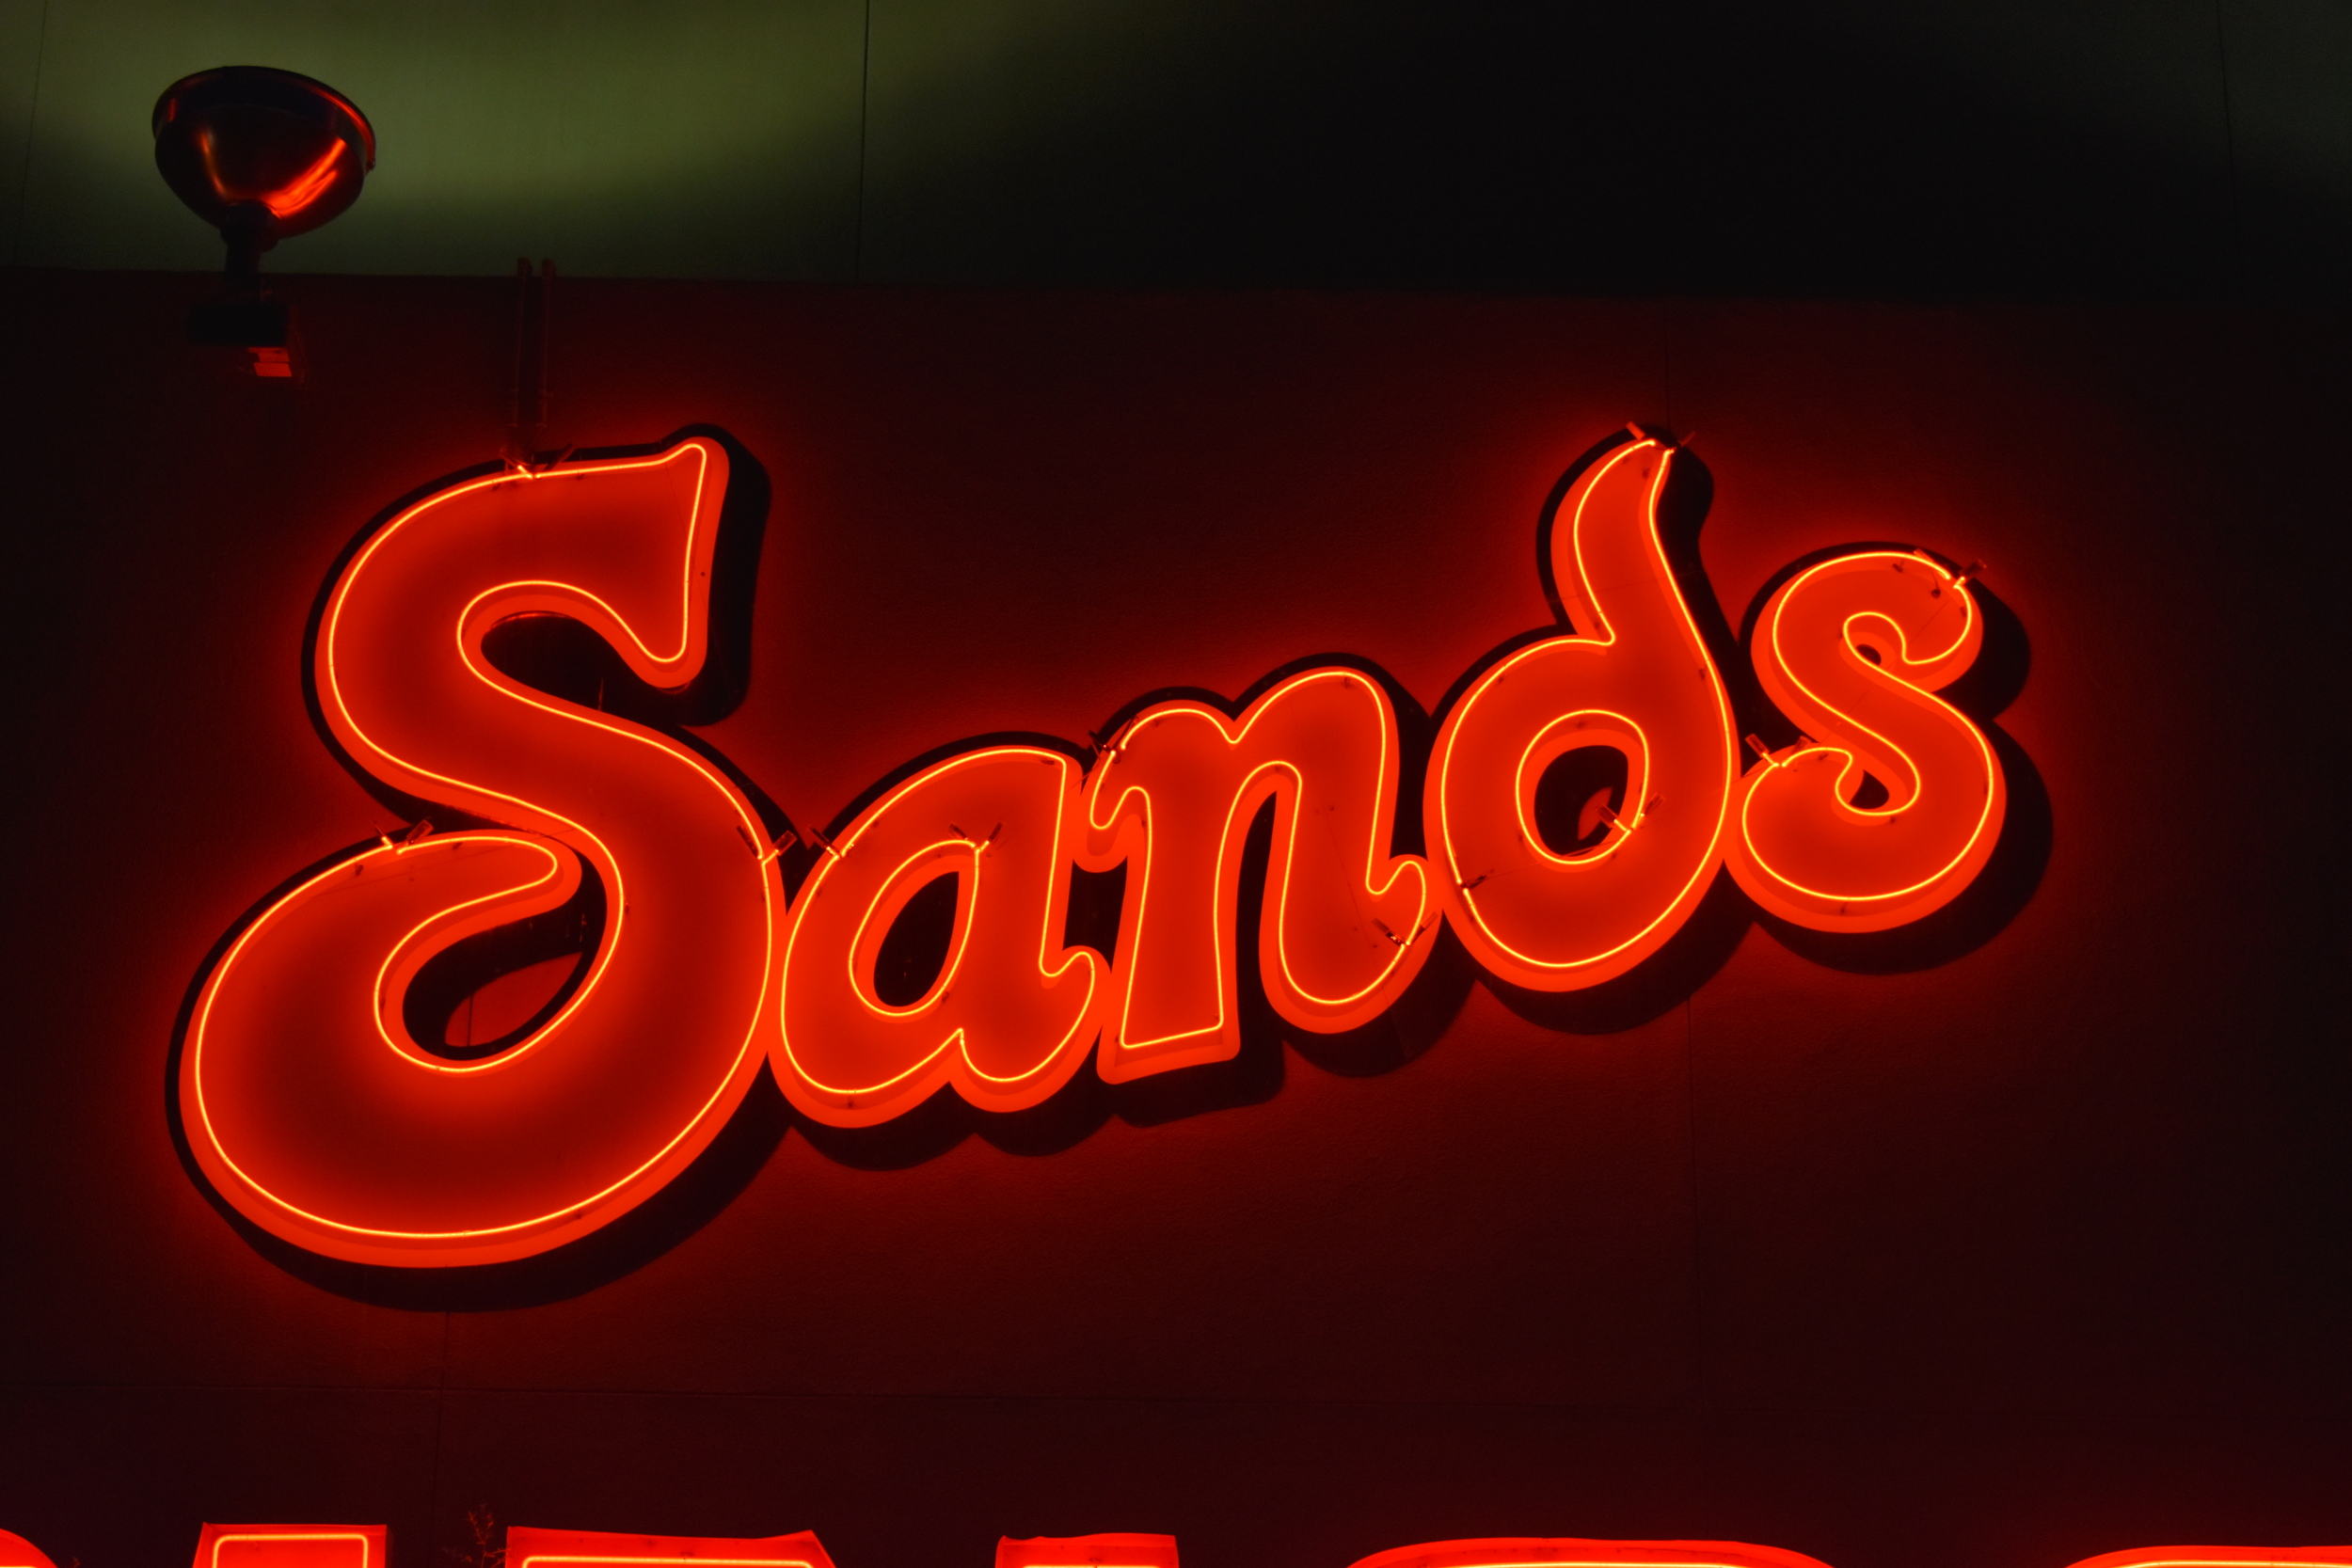 The Sands Regency wall mounted sign, Reno, Nevada